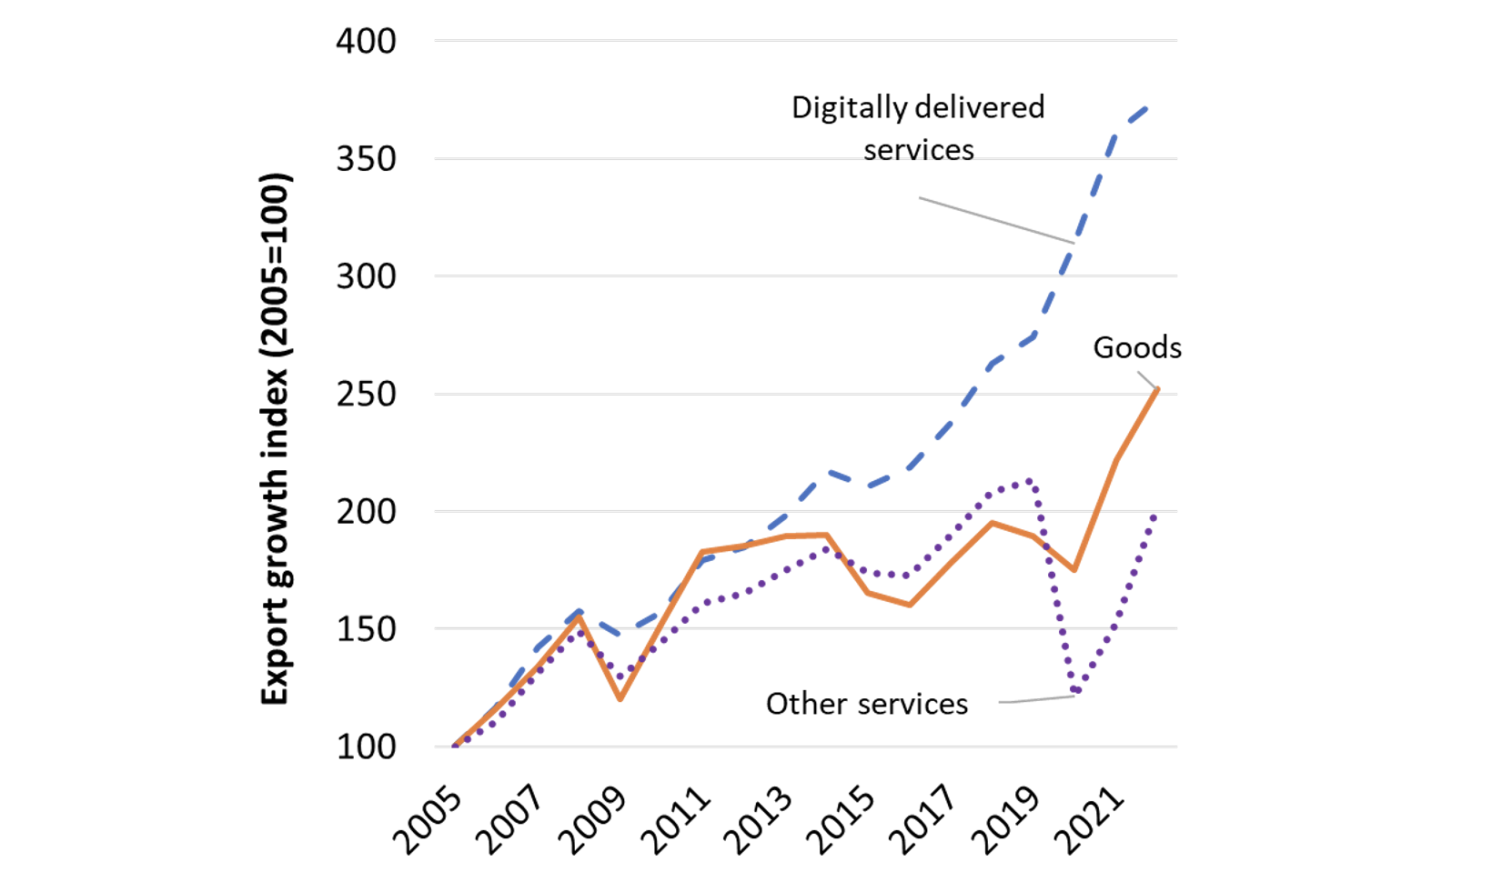 Figure 1  Digitally delivered services are the fastest-growing segment of international trade